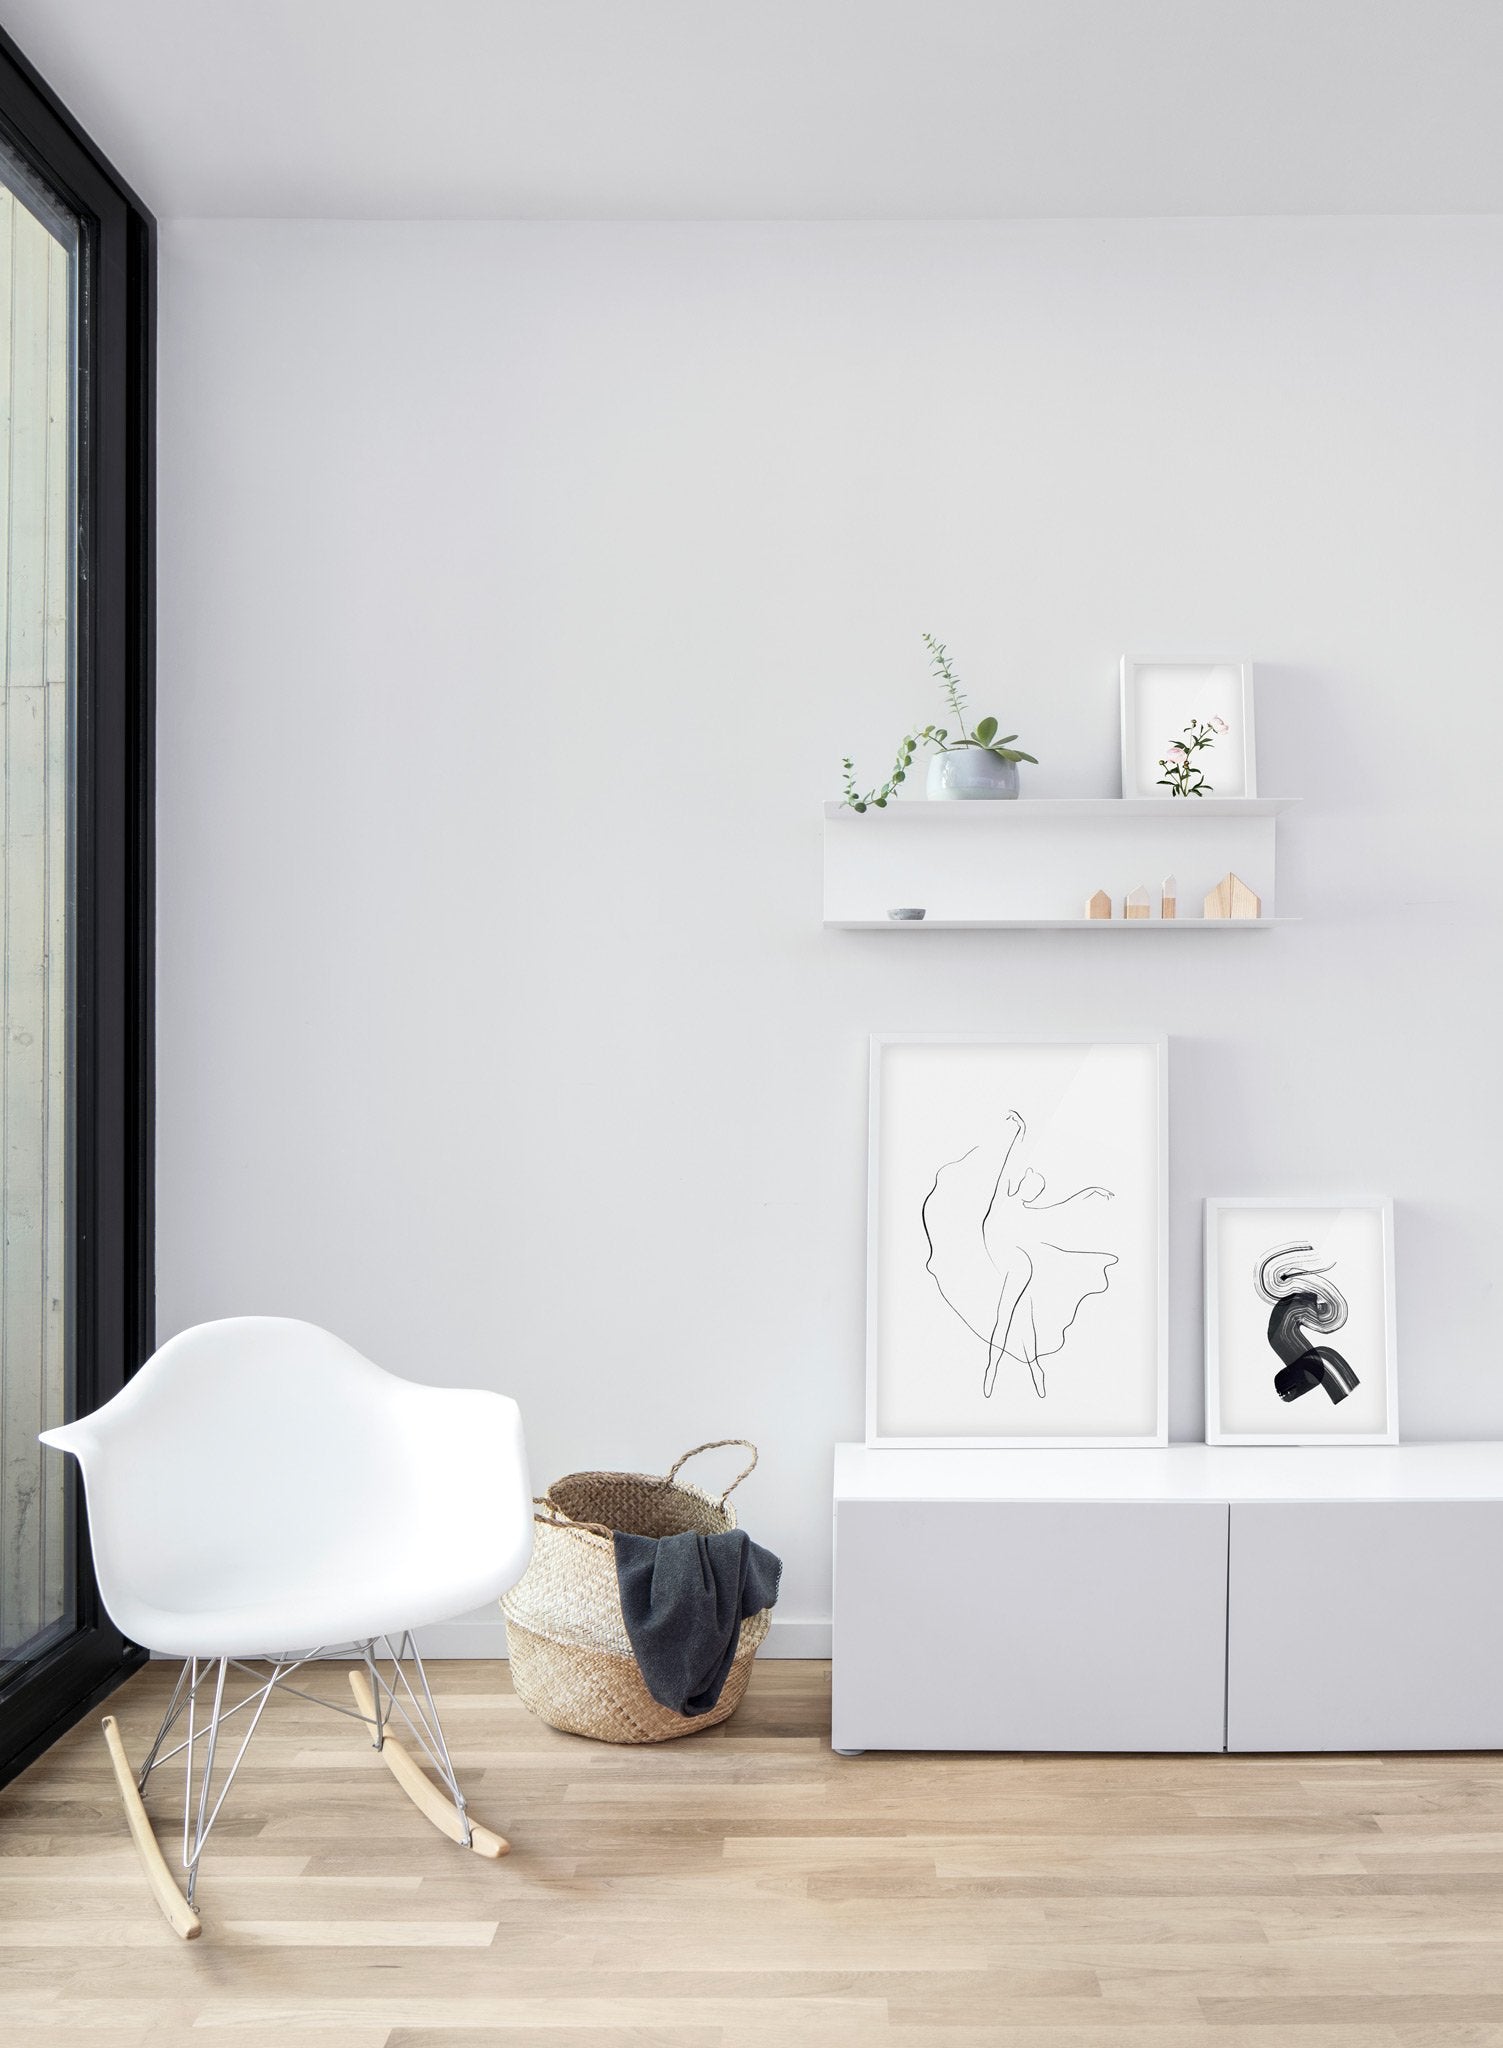 Modern minimalist poster by Opposite Wall with abstract illustration of Attitude - Gallery wall trio - Living room